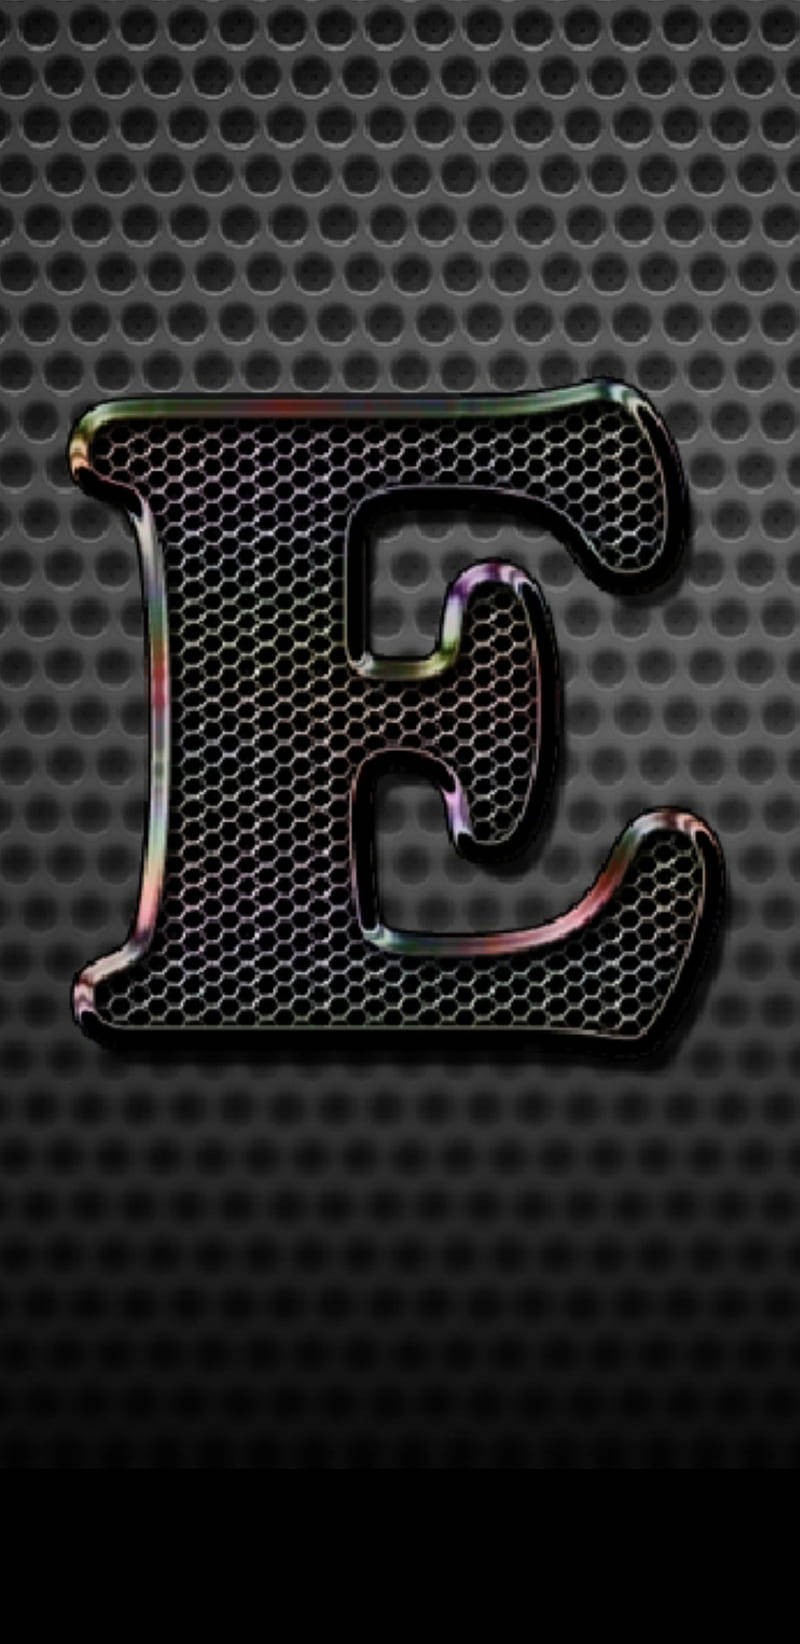 Metal Mesh Forming The Letter E Background